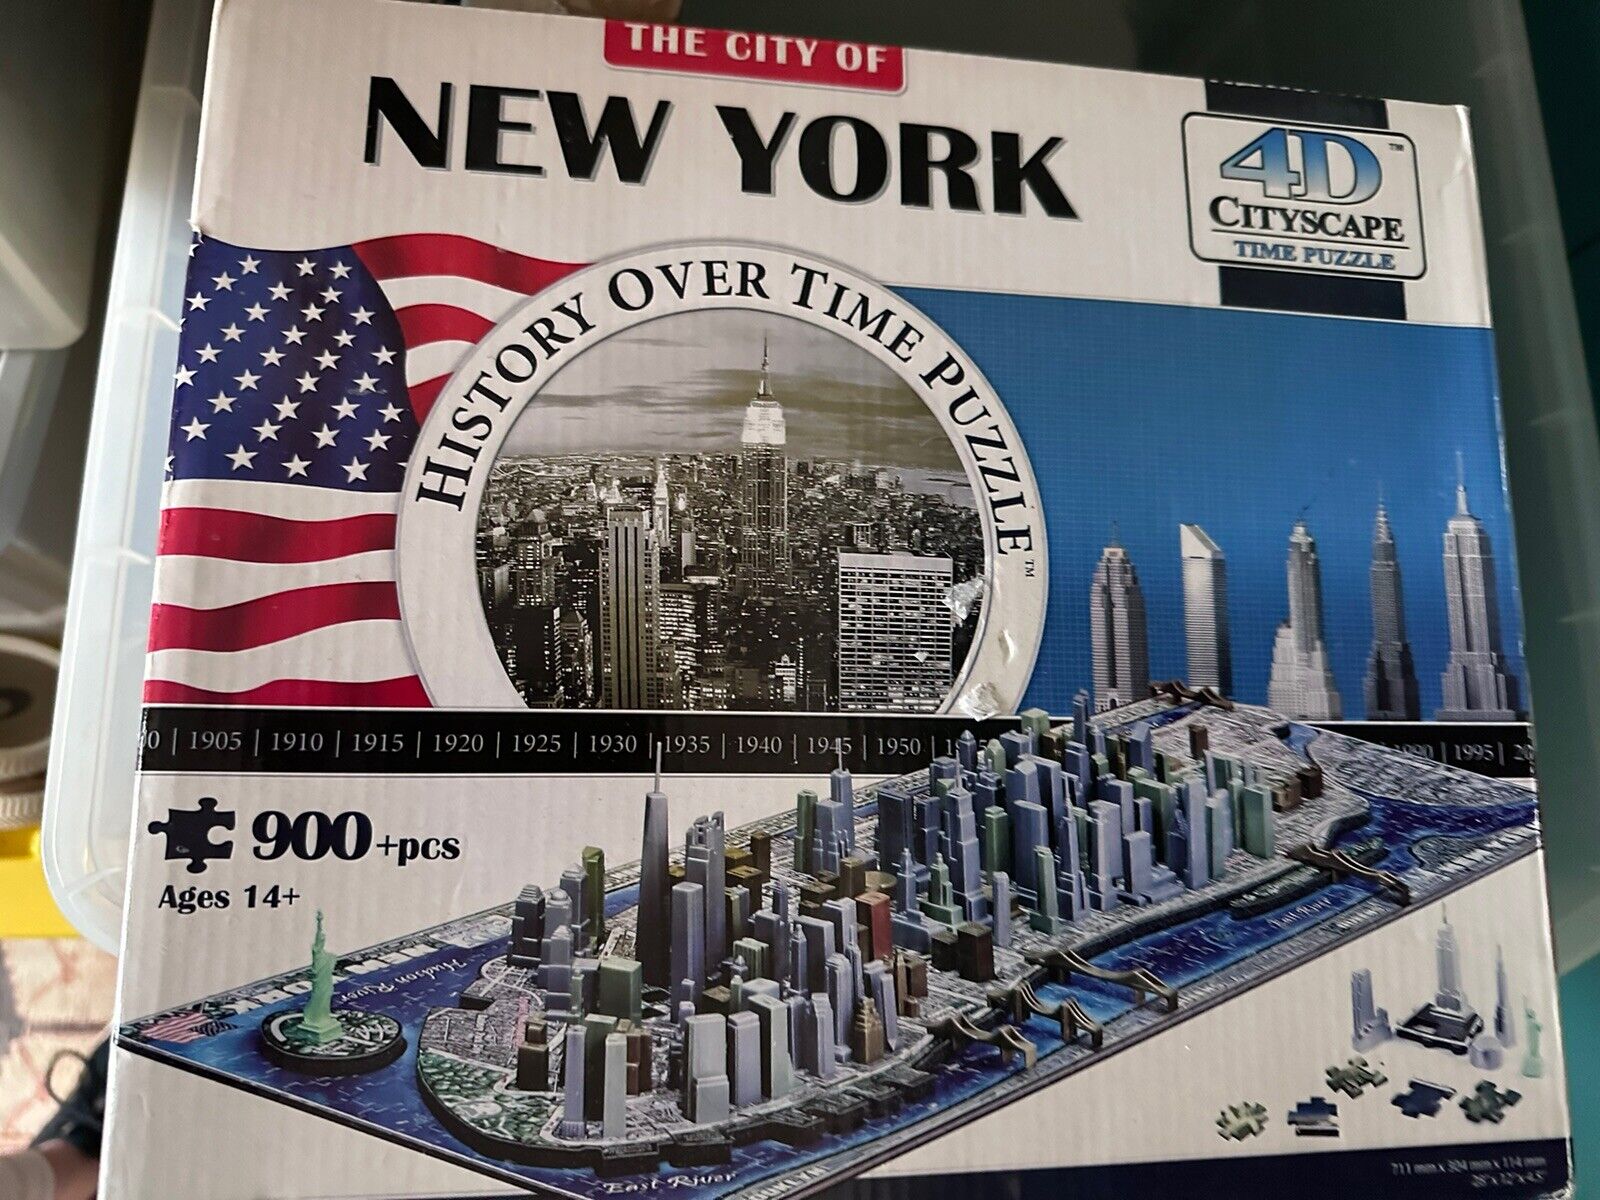 The City of New York 4D Cityscape 900+ pcs History Over Time Puzzle Model